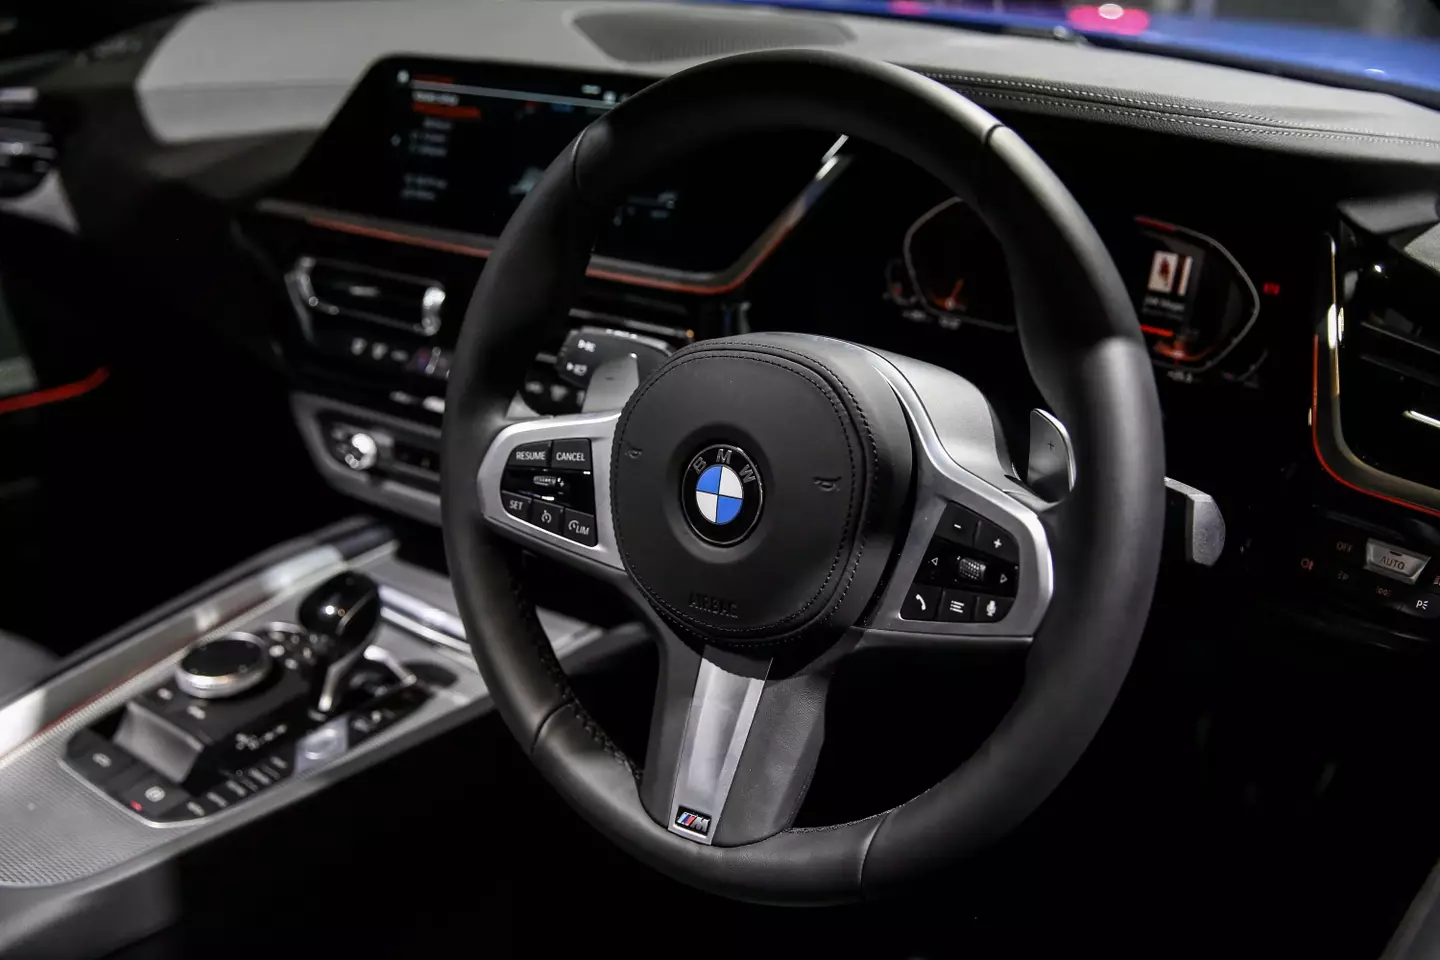 BMW drivers could claim thousands in compensation.